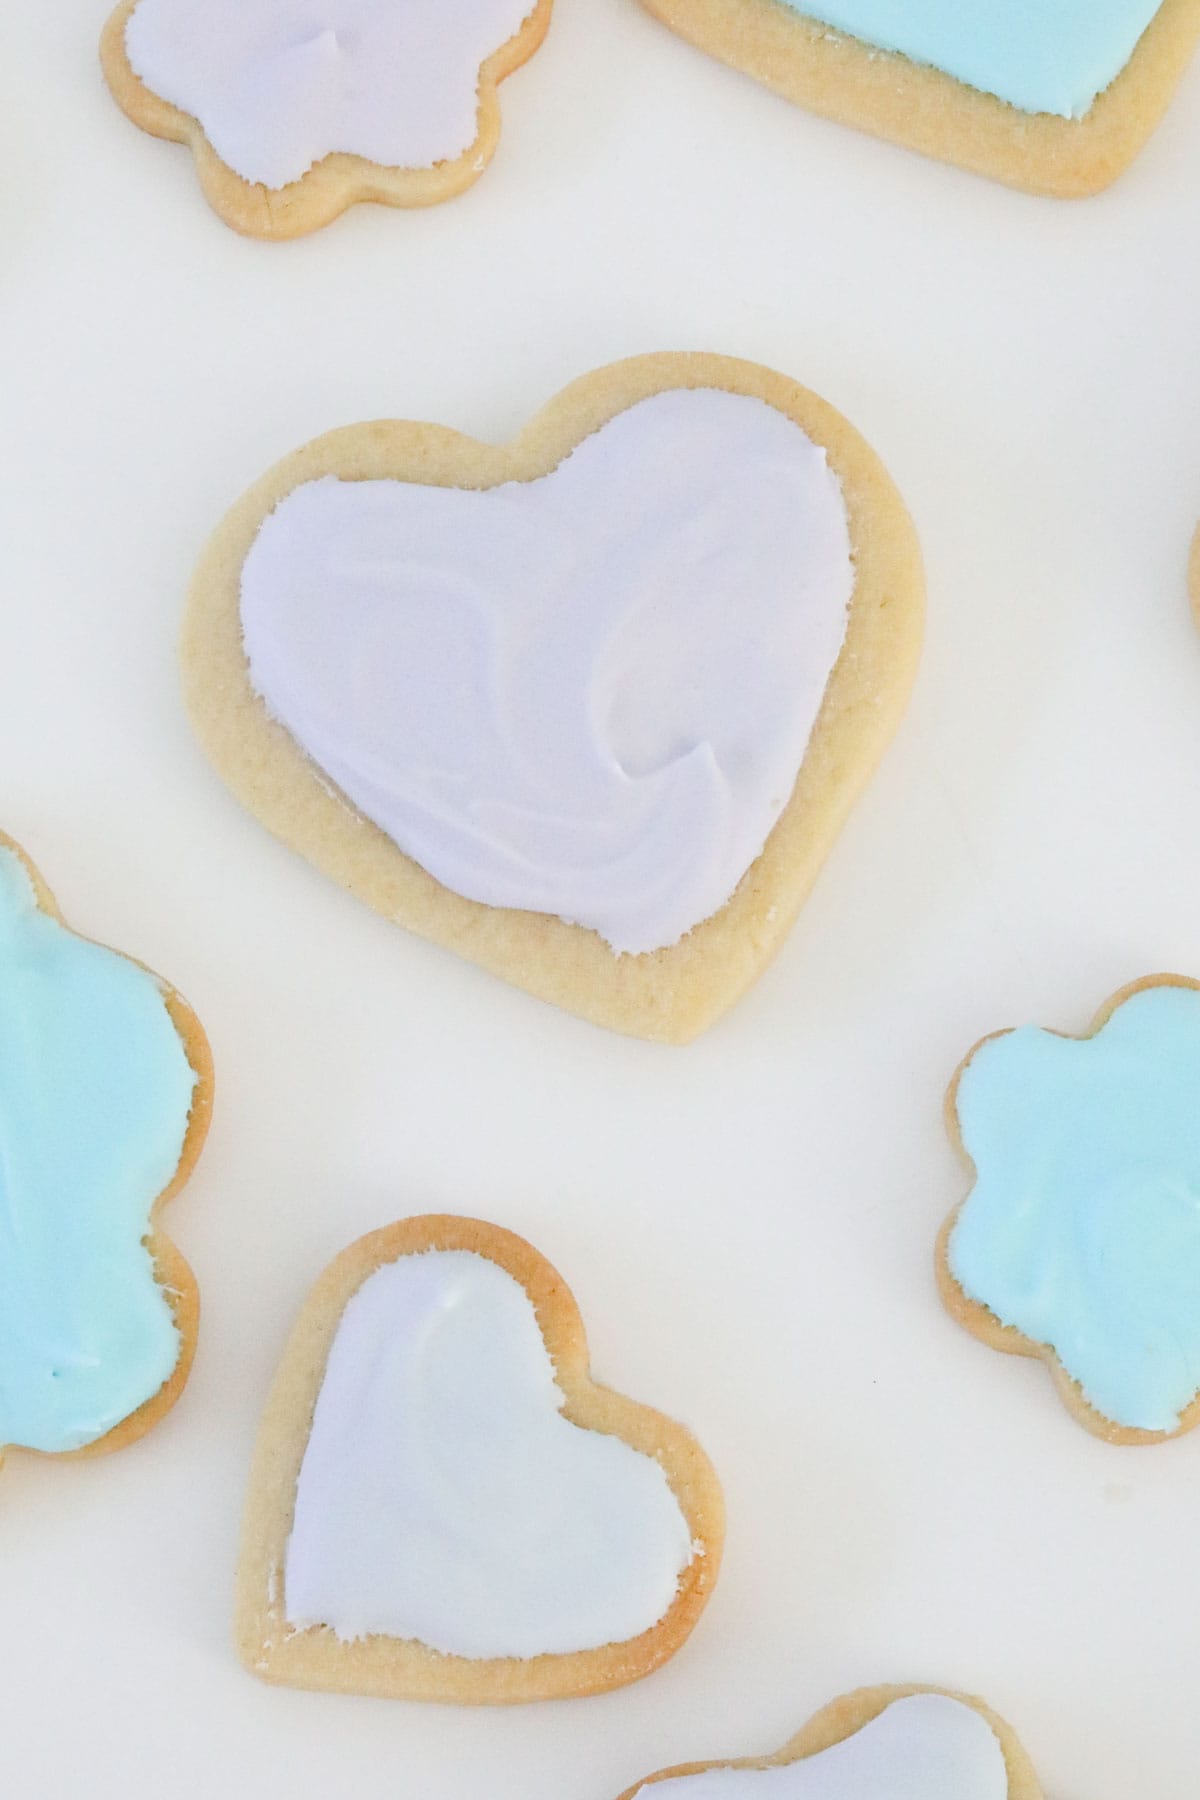 Close up of an iced sugar cookie heart, with other flower shaped cookies just visible.